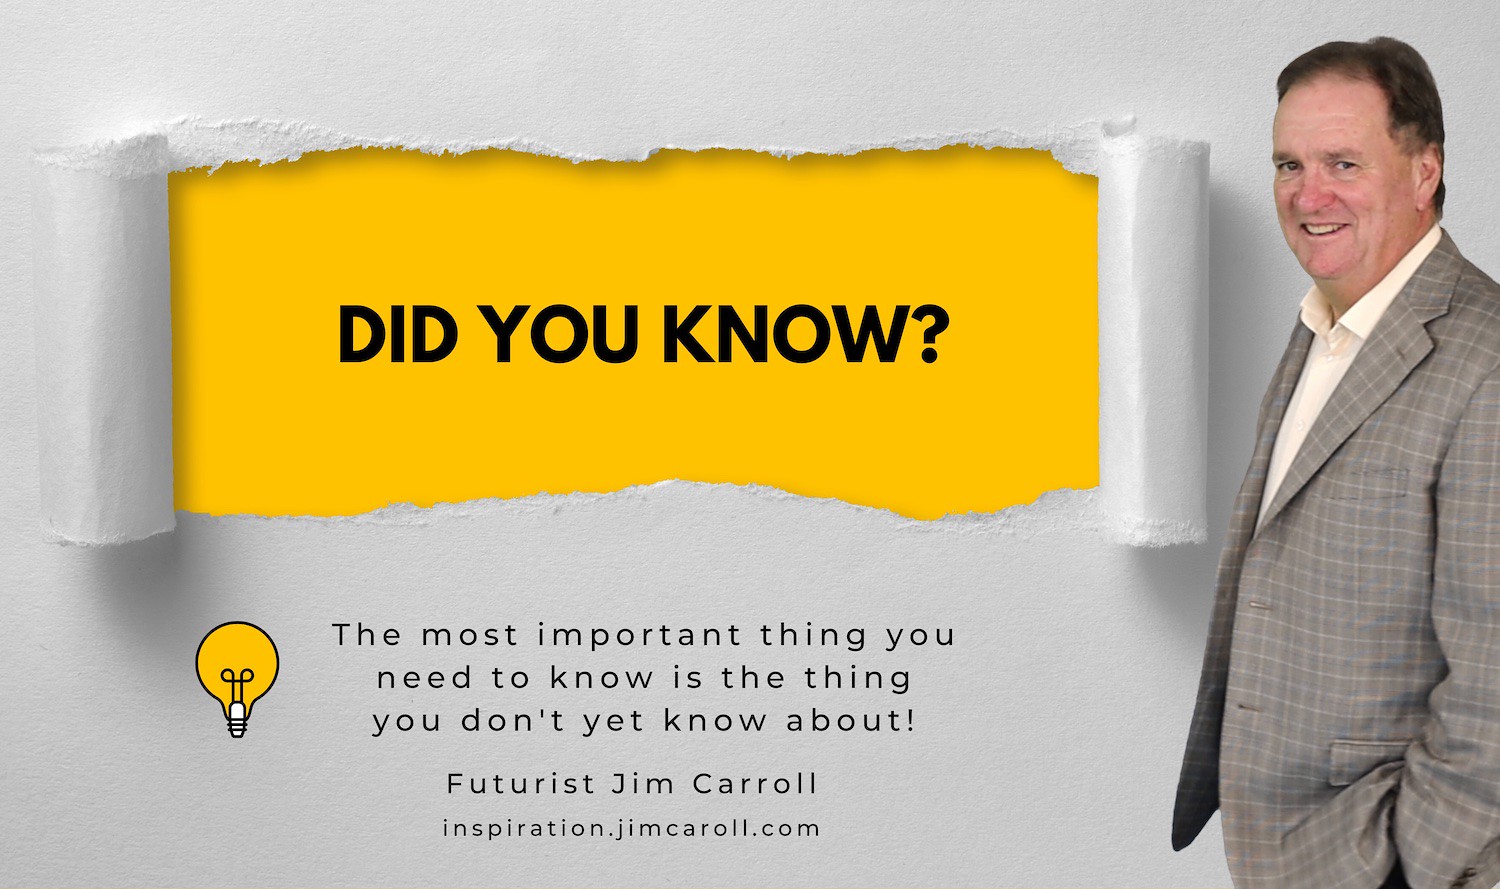 "The most important thing you need to know is the thing you don't yet know about!" - Futurist Jim Carroll